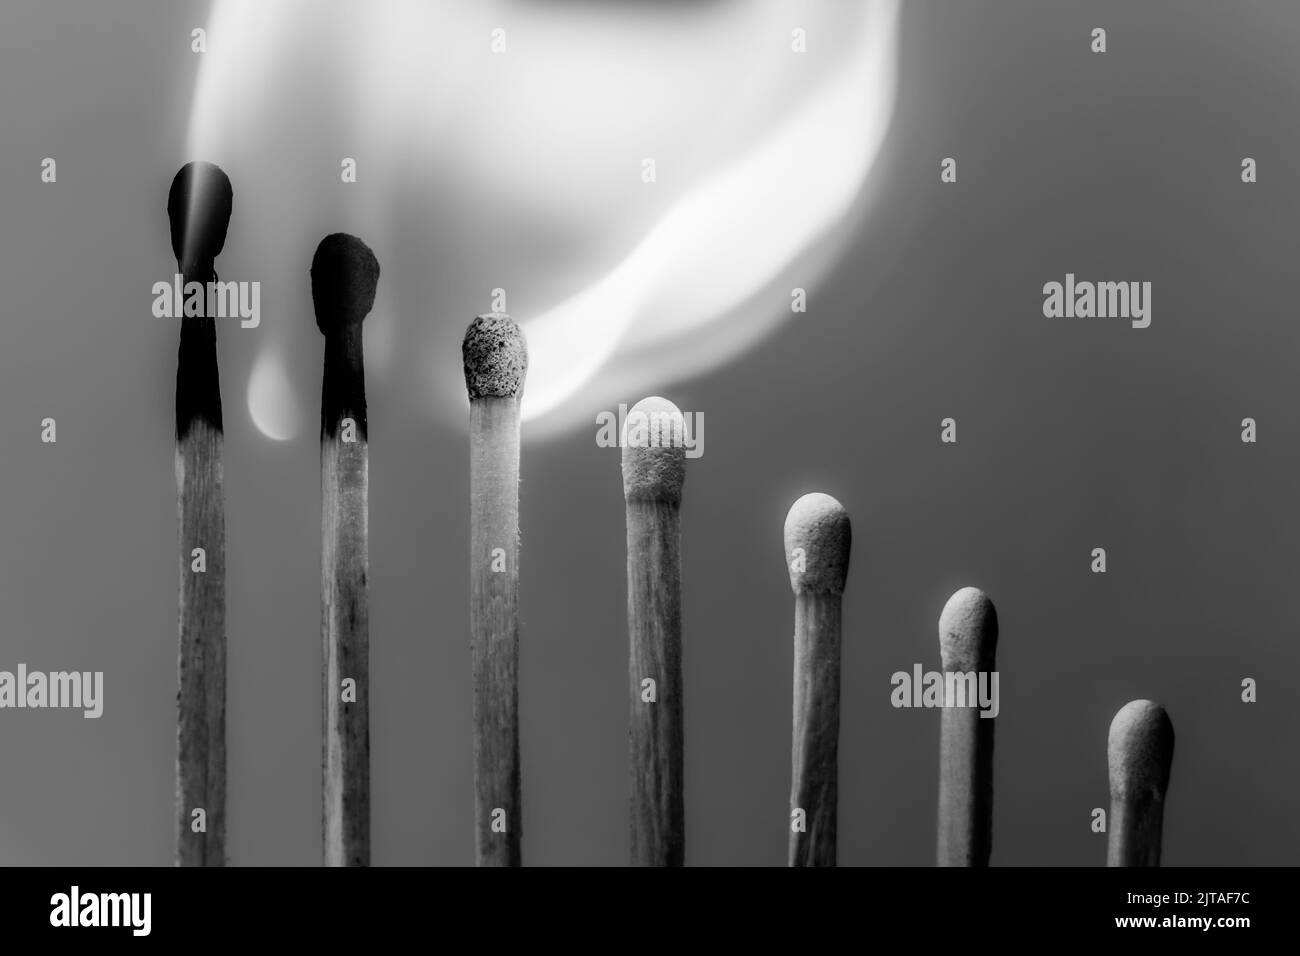 Wooden matchsticks burning in sequence. Black and white colors. Selective Focus. Stock Photo